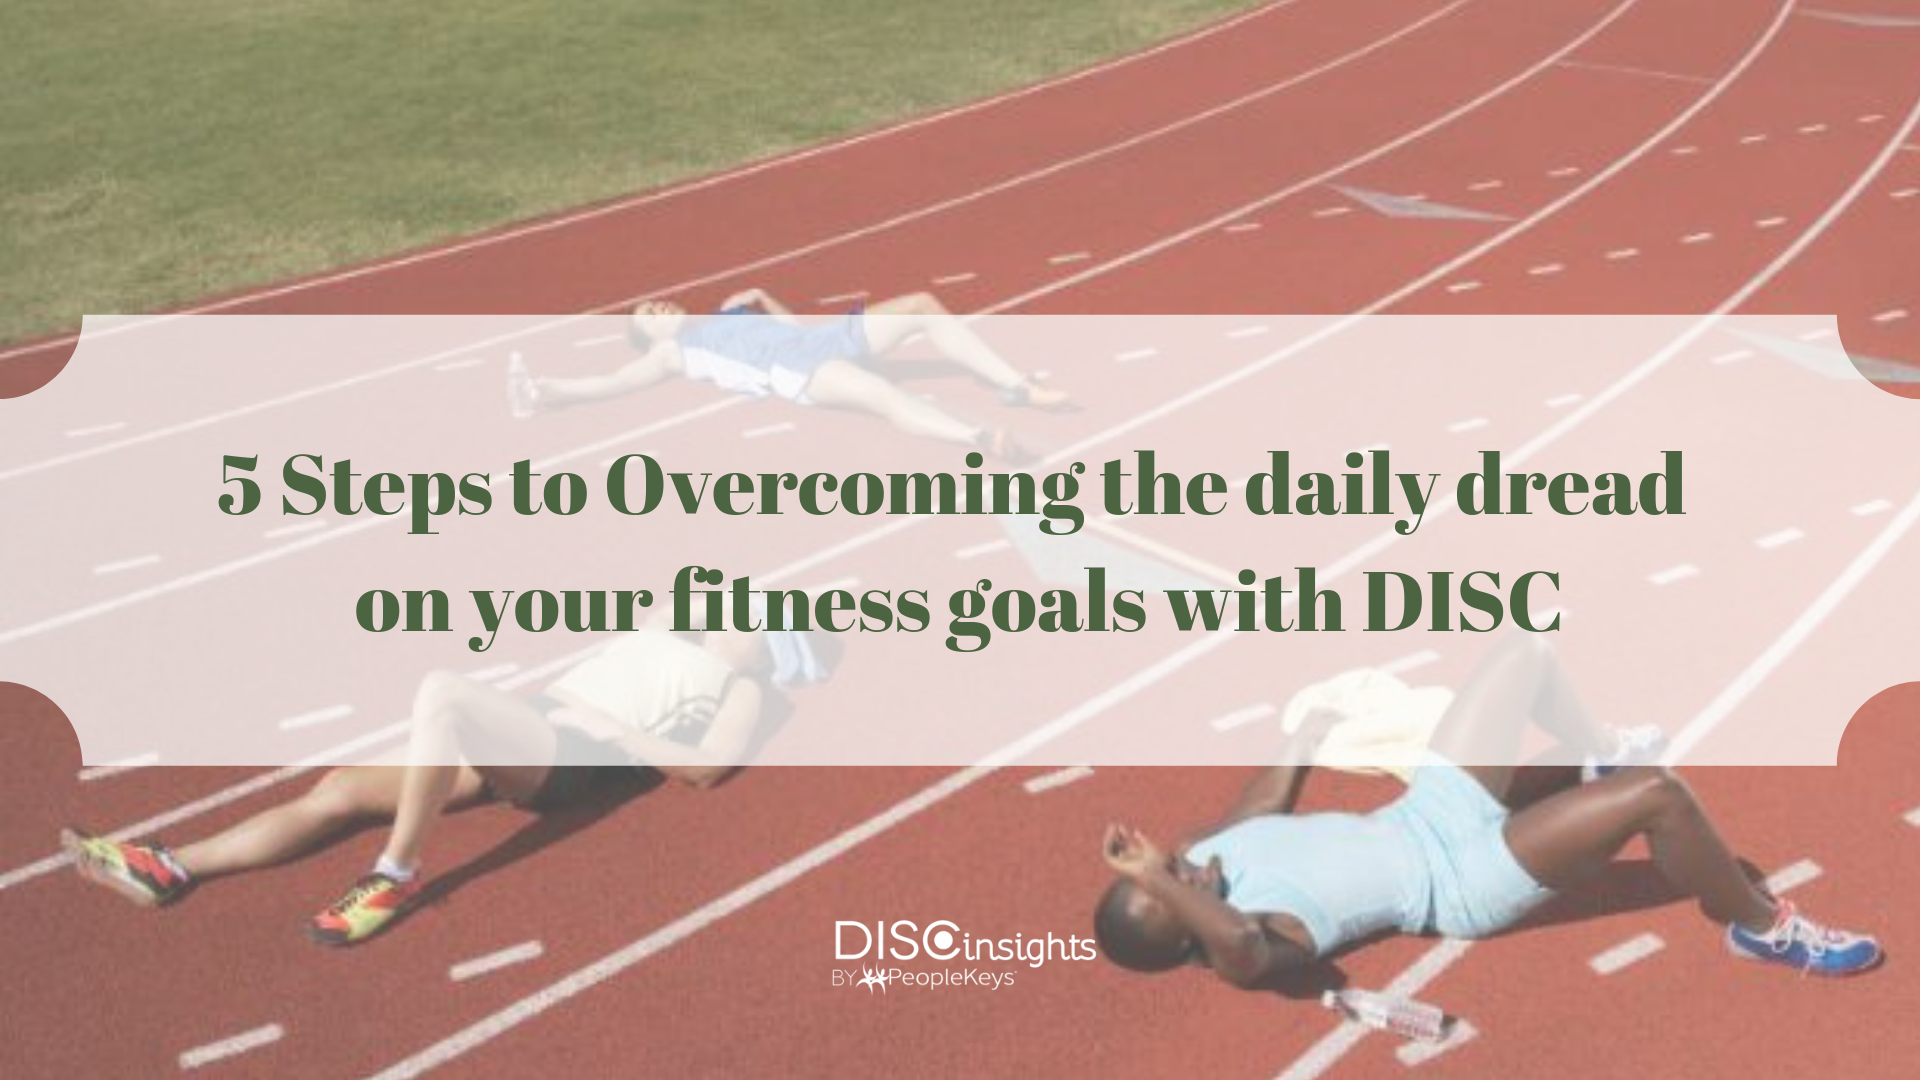 5 Steps to Overcoming the daily dread on your fitness goals with DISC